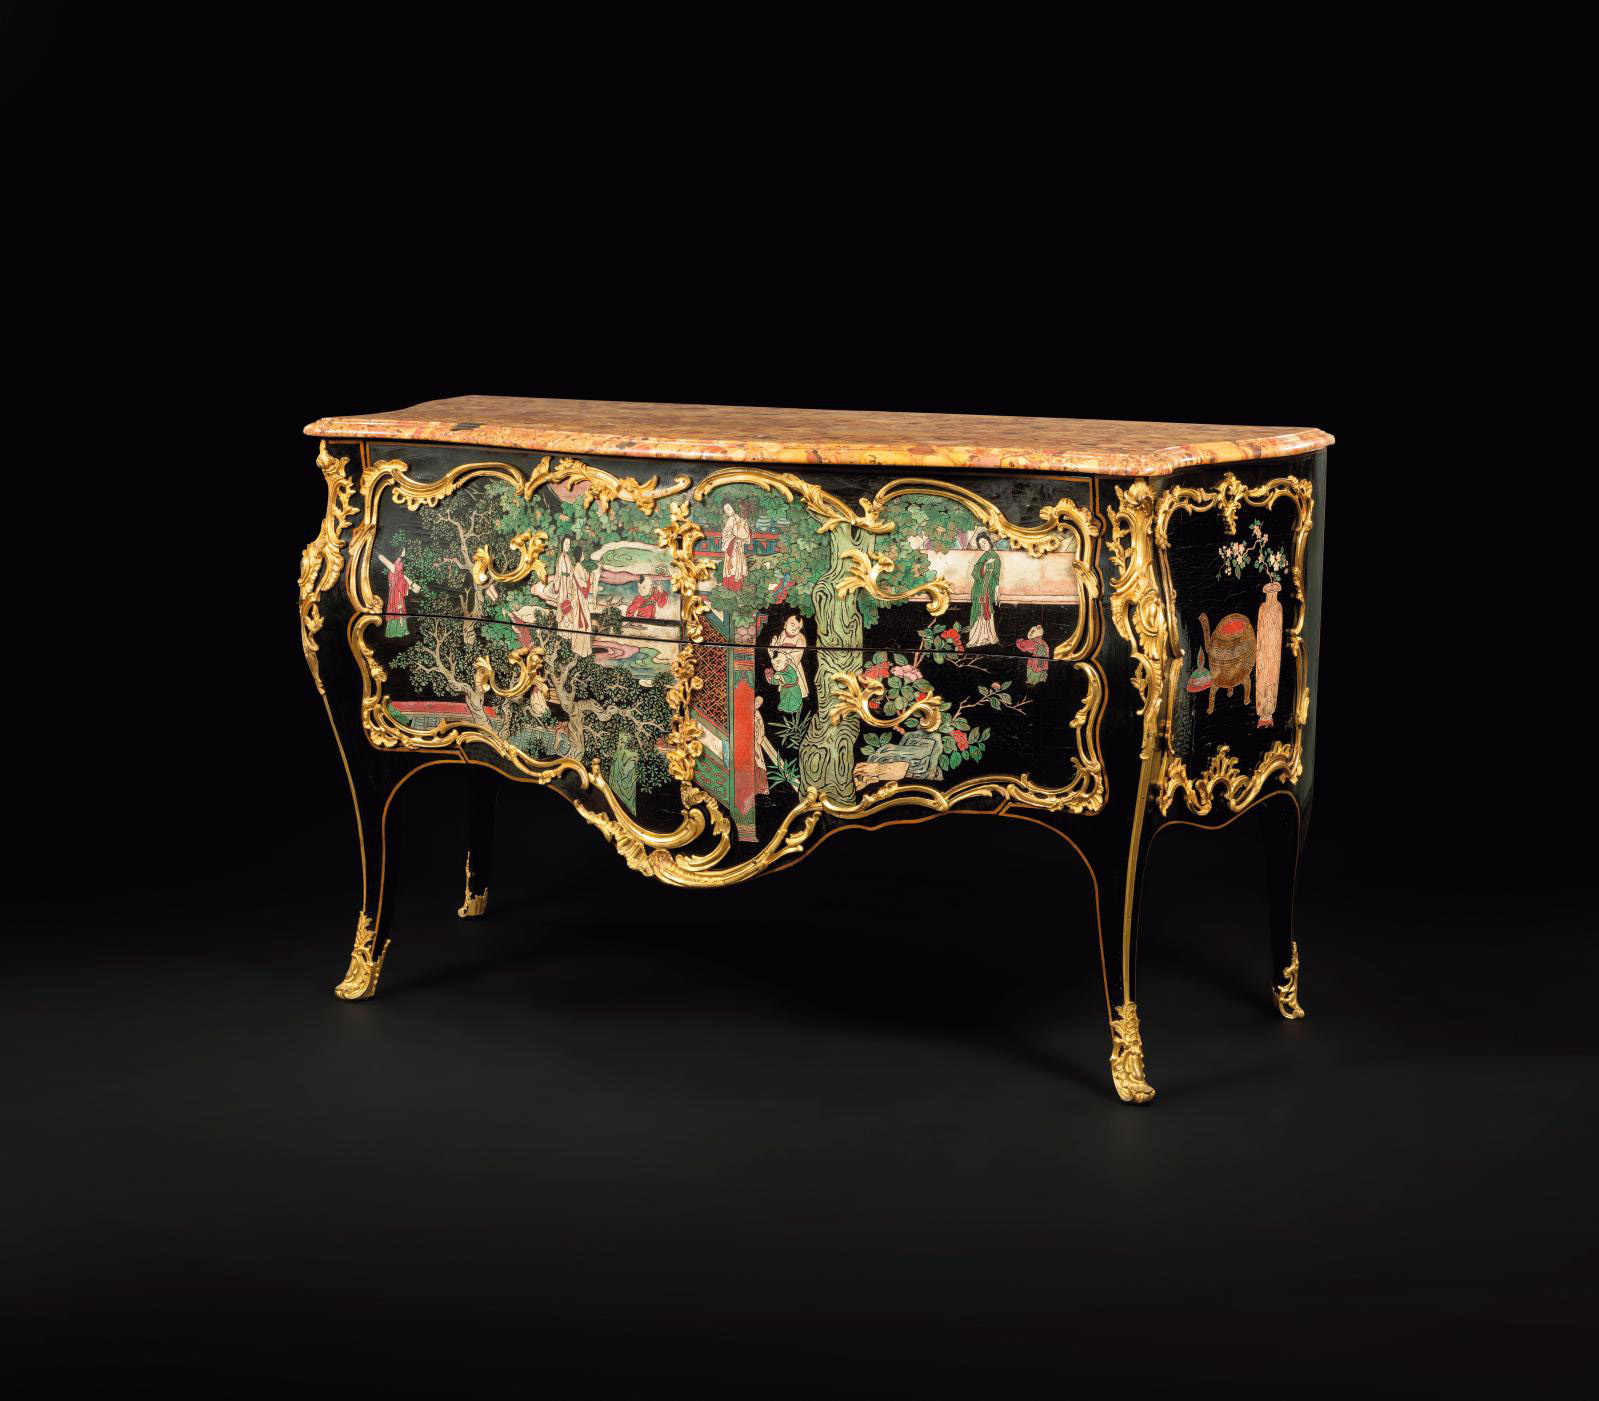 Coromandel lacquer commode with darkened wood frames, sinuous-formed façade and sides and two drawers, decorated with palace scenes and utensils in polychrome lacquer on a black background, the top in Breccia di Aleppo marble, standing on curved uprights ending in arched feet, stamped Pierre Roussel and JME, cabinetmaker admitted as a master in 1745, Louis XV period, c. 1750-1755, 86.5 x 145.5 x 66 cm/34 x 57.3 x 26 in. Estimate: €50,000/80,000